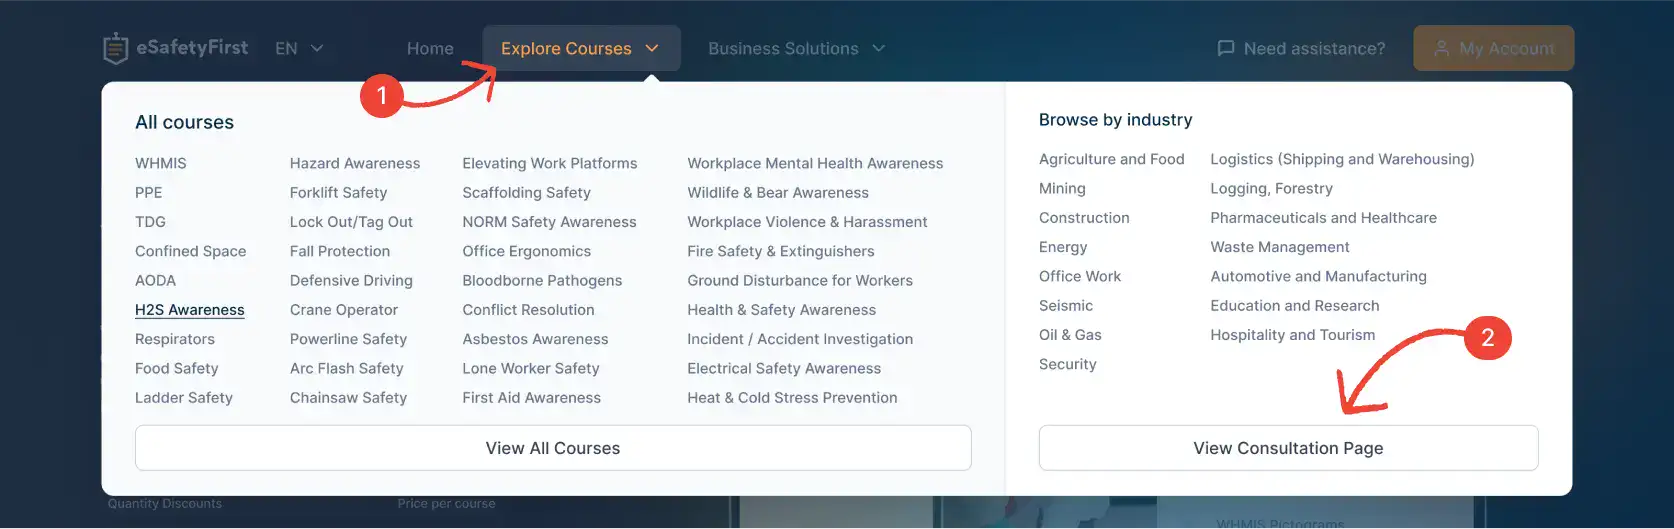 Website menu preview under 'Explore Courses', highlighting the 'View All Courses' button and the 'View Consultation Page' for guidance on course selection.